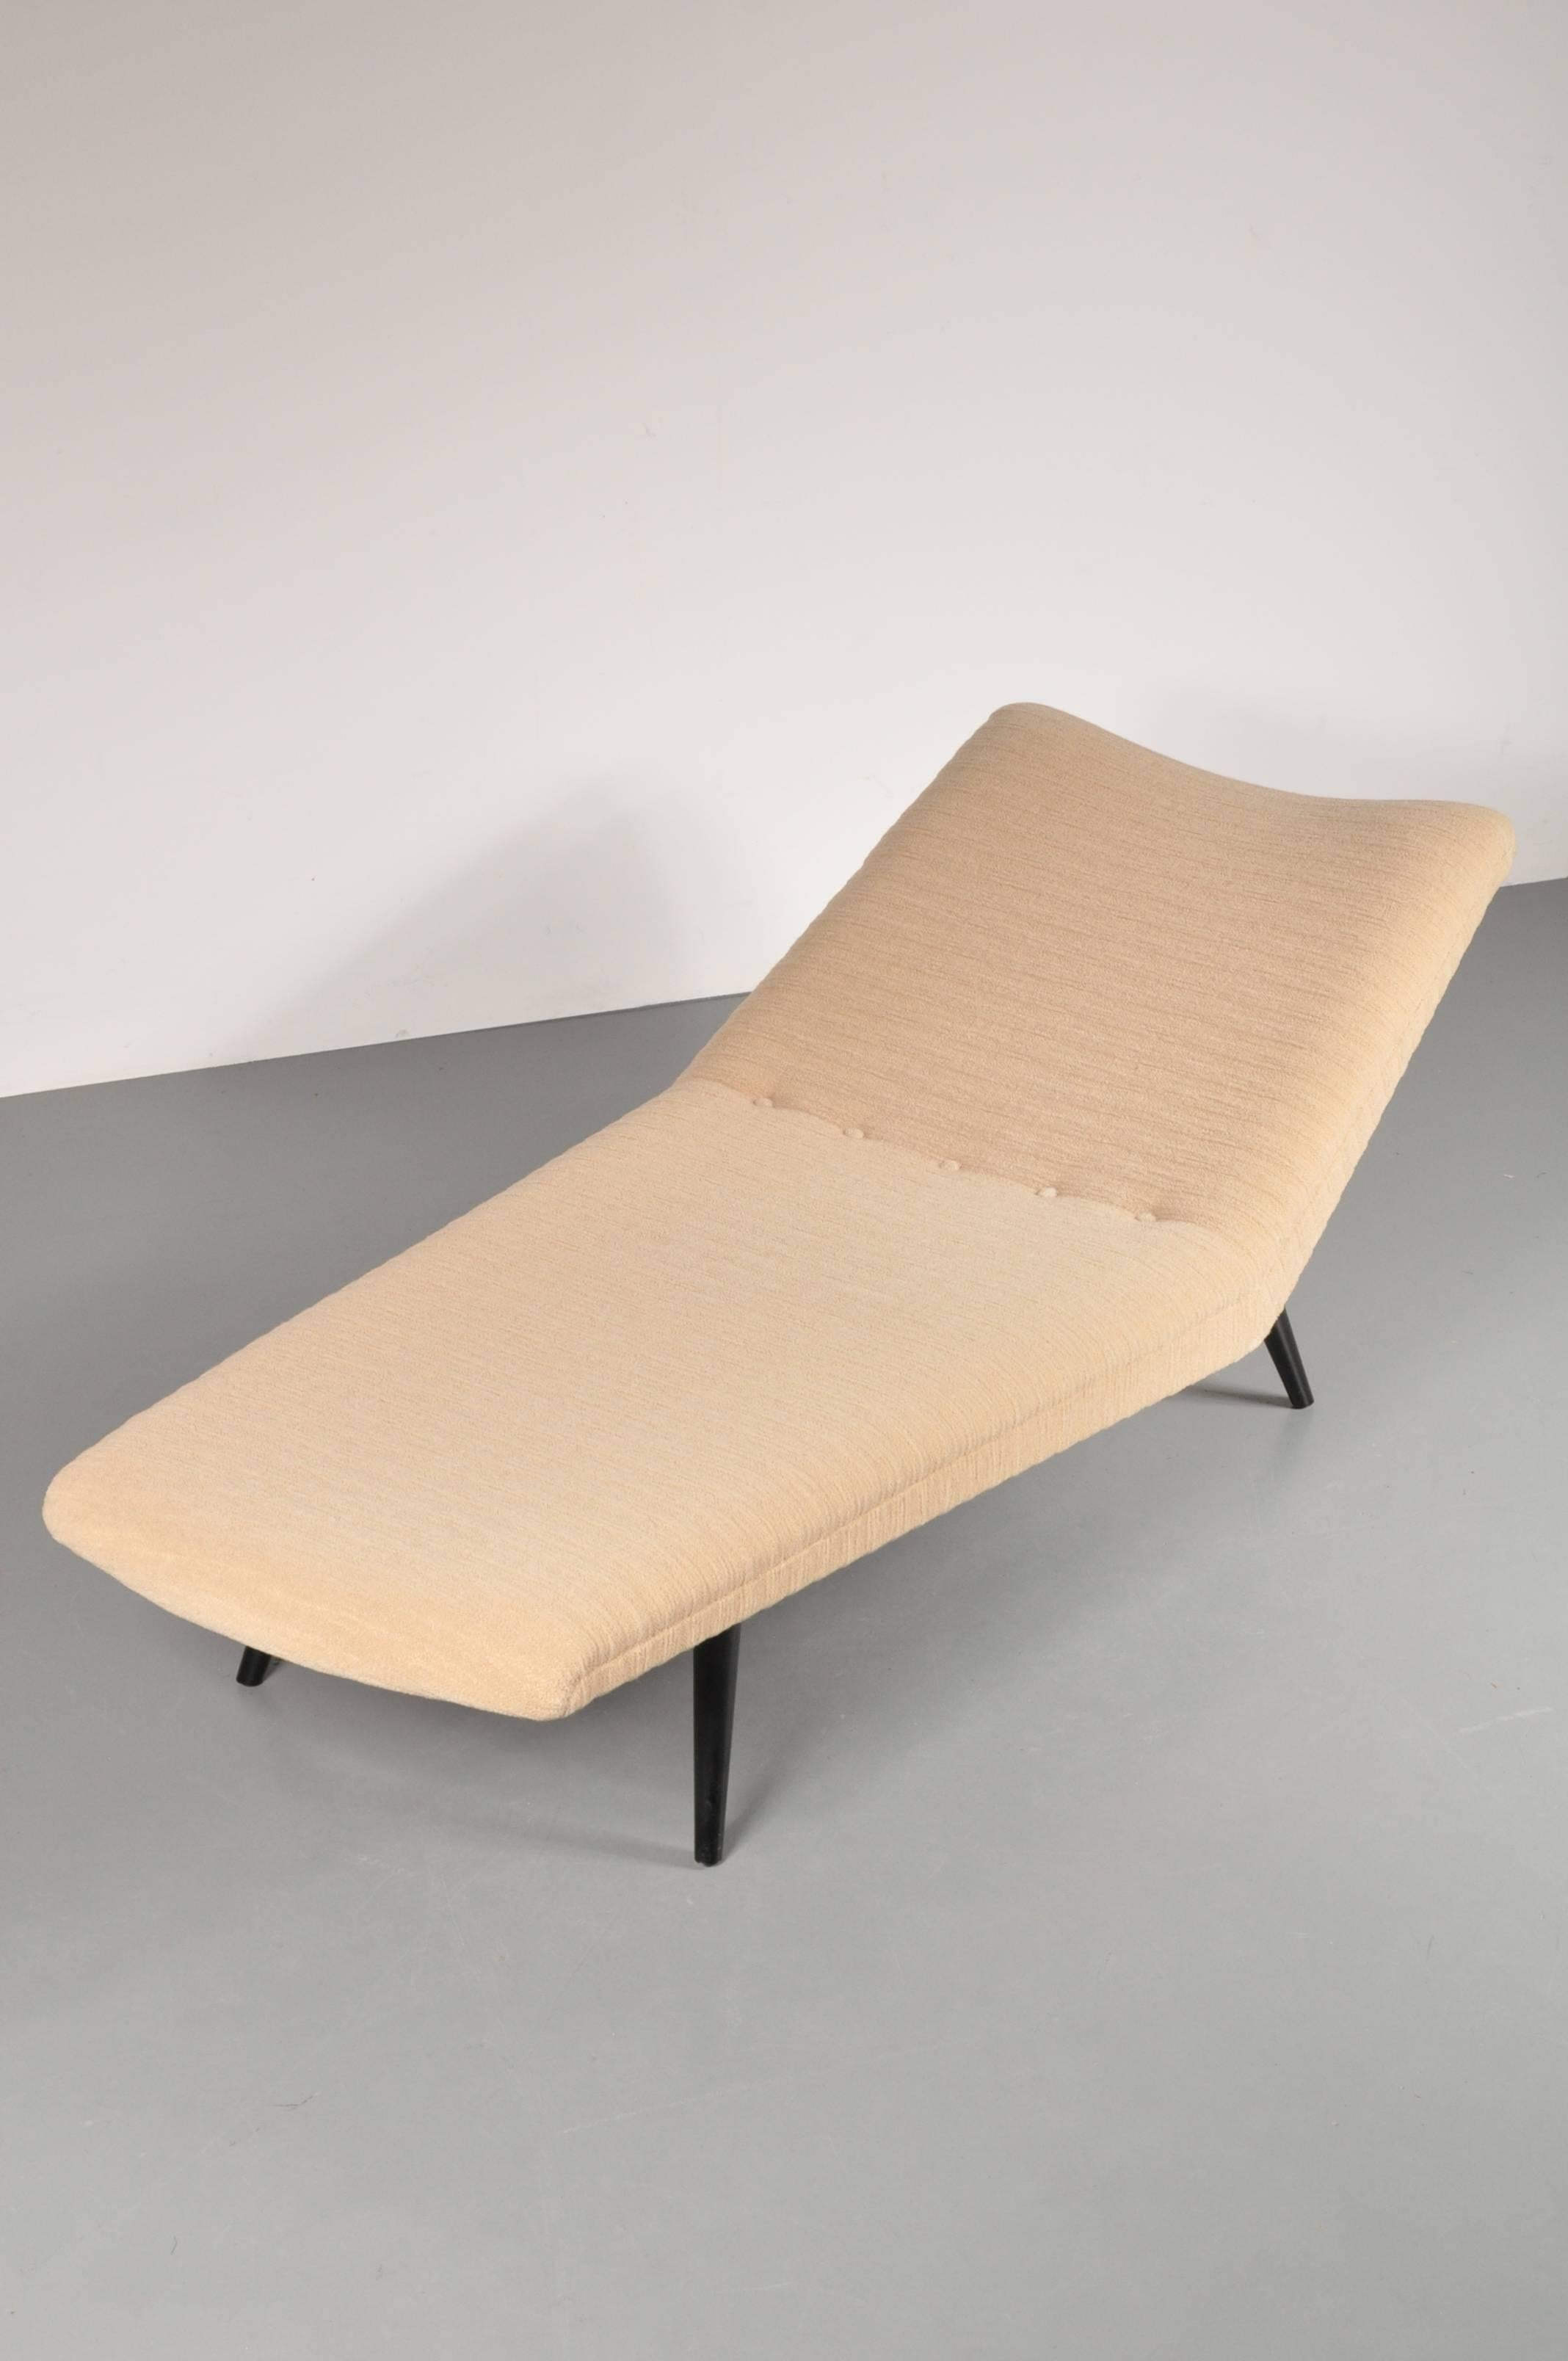 A very rare daybed designed by Theo Ruth, manufactured by Wagemans & Van Tuinen (later known as Artifort) in the Netherlands, circa 1950.

This eye-catching daybed is upholstered in boucle-like cream colored fabric. It has black lacquered wooden